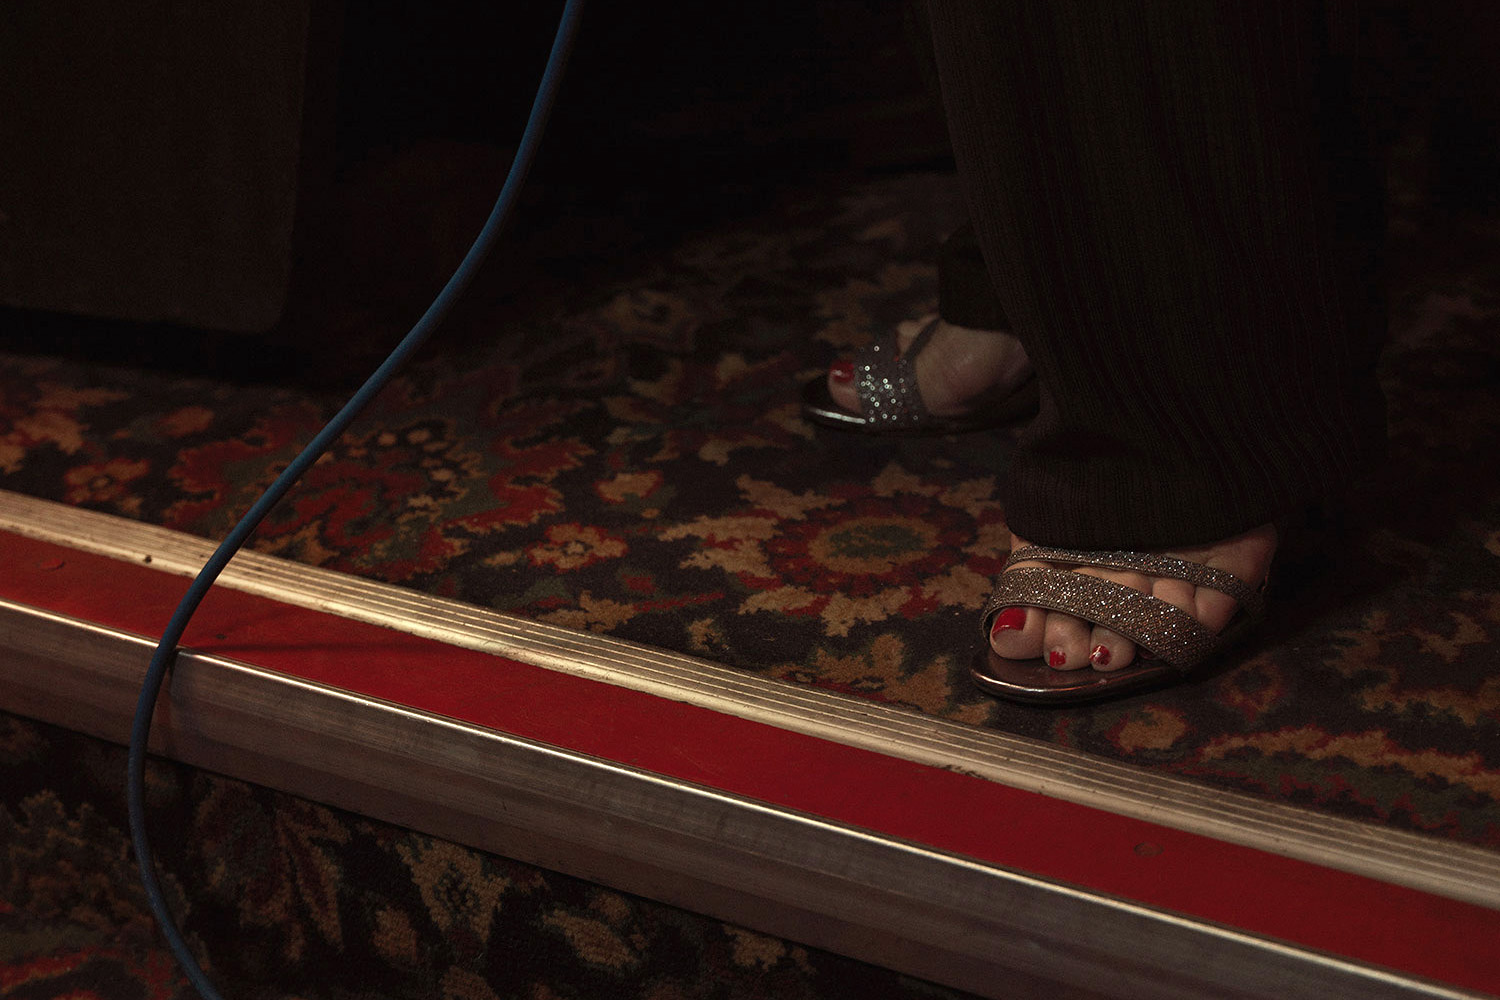 Painted toe nails, sandals, pub floor. Image from Last of the Old Crooners, Palm Tree pub by Tom Oldham